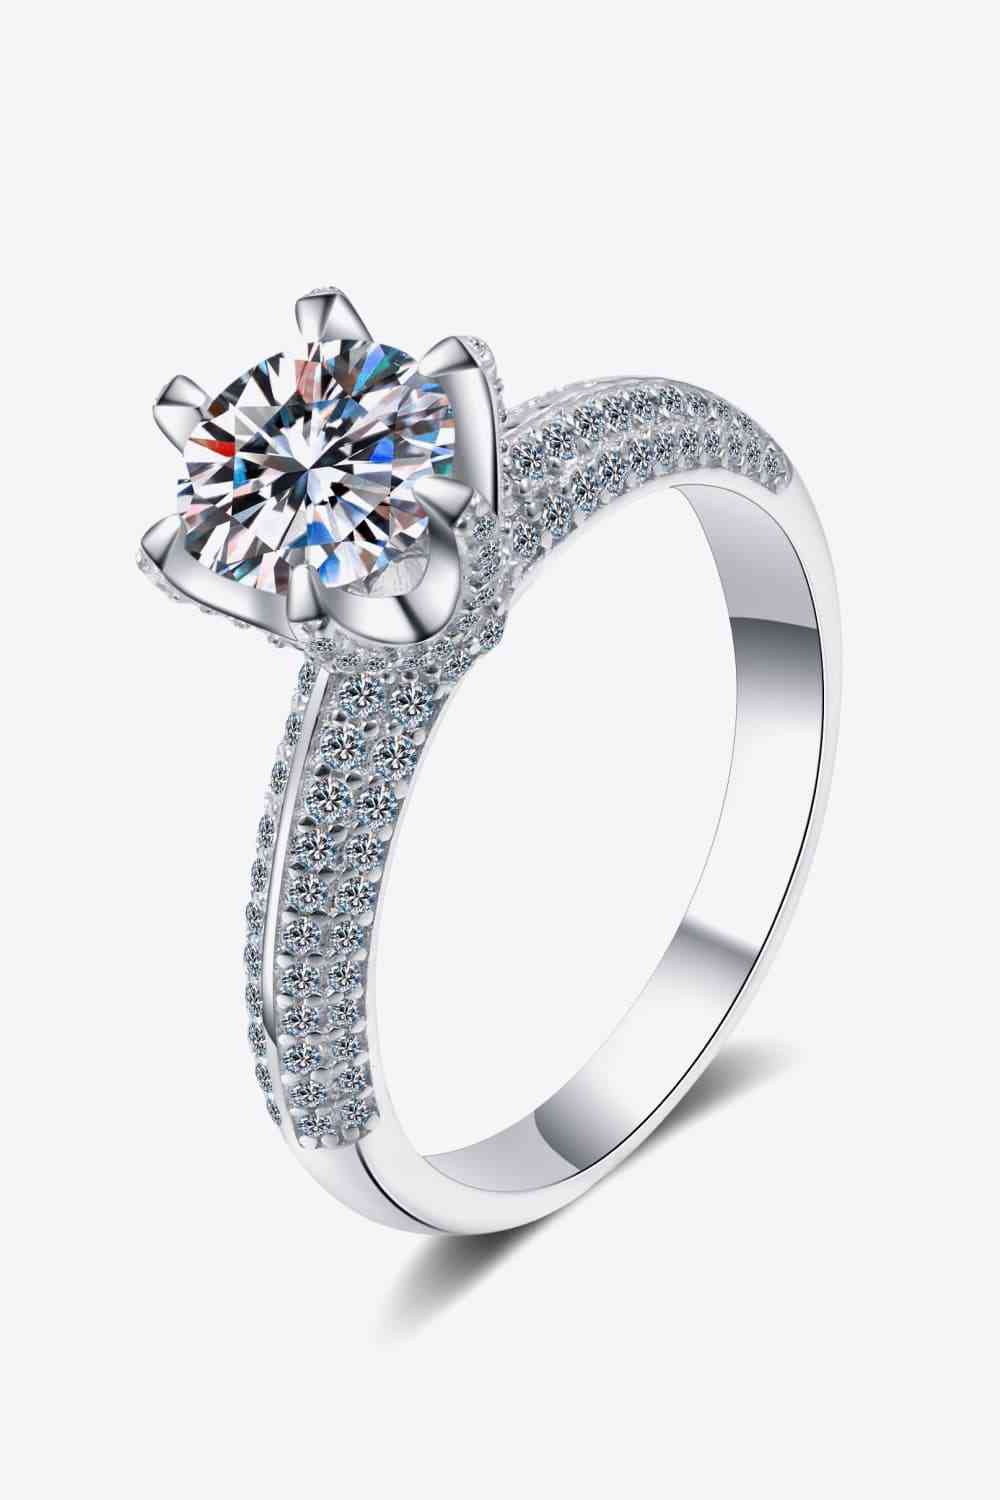 2 Carat Moissanite 925 Sterling Silver Side Stone Ring - Tophatter Deals